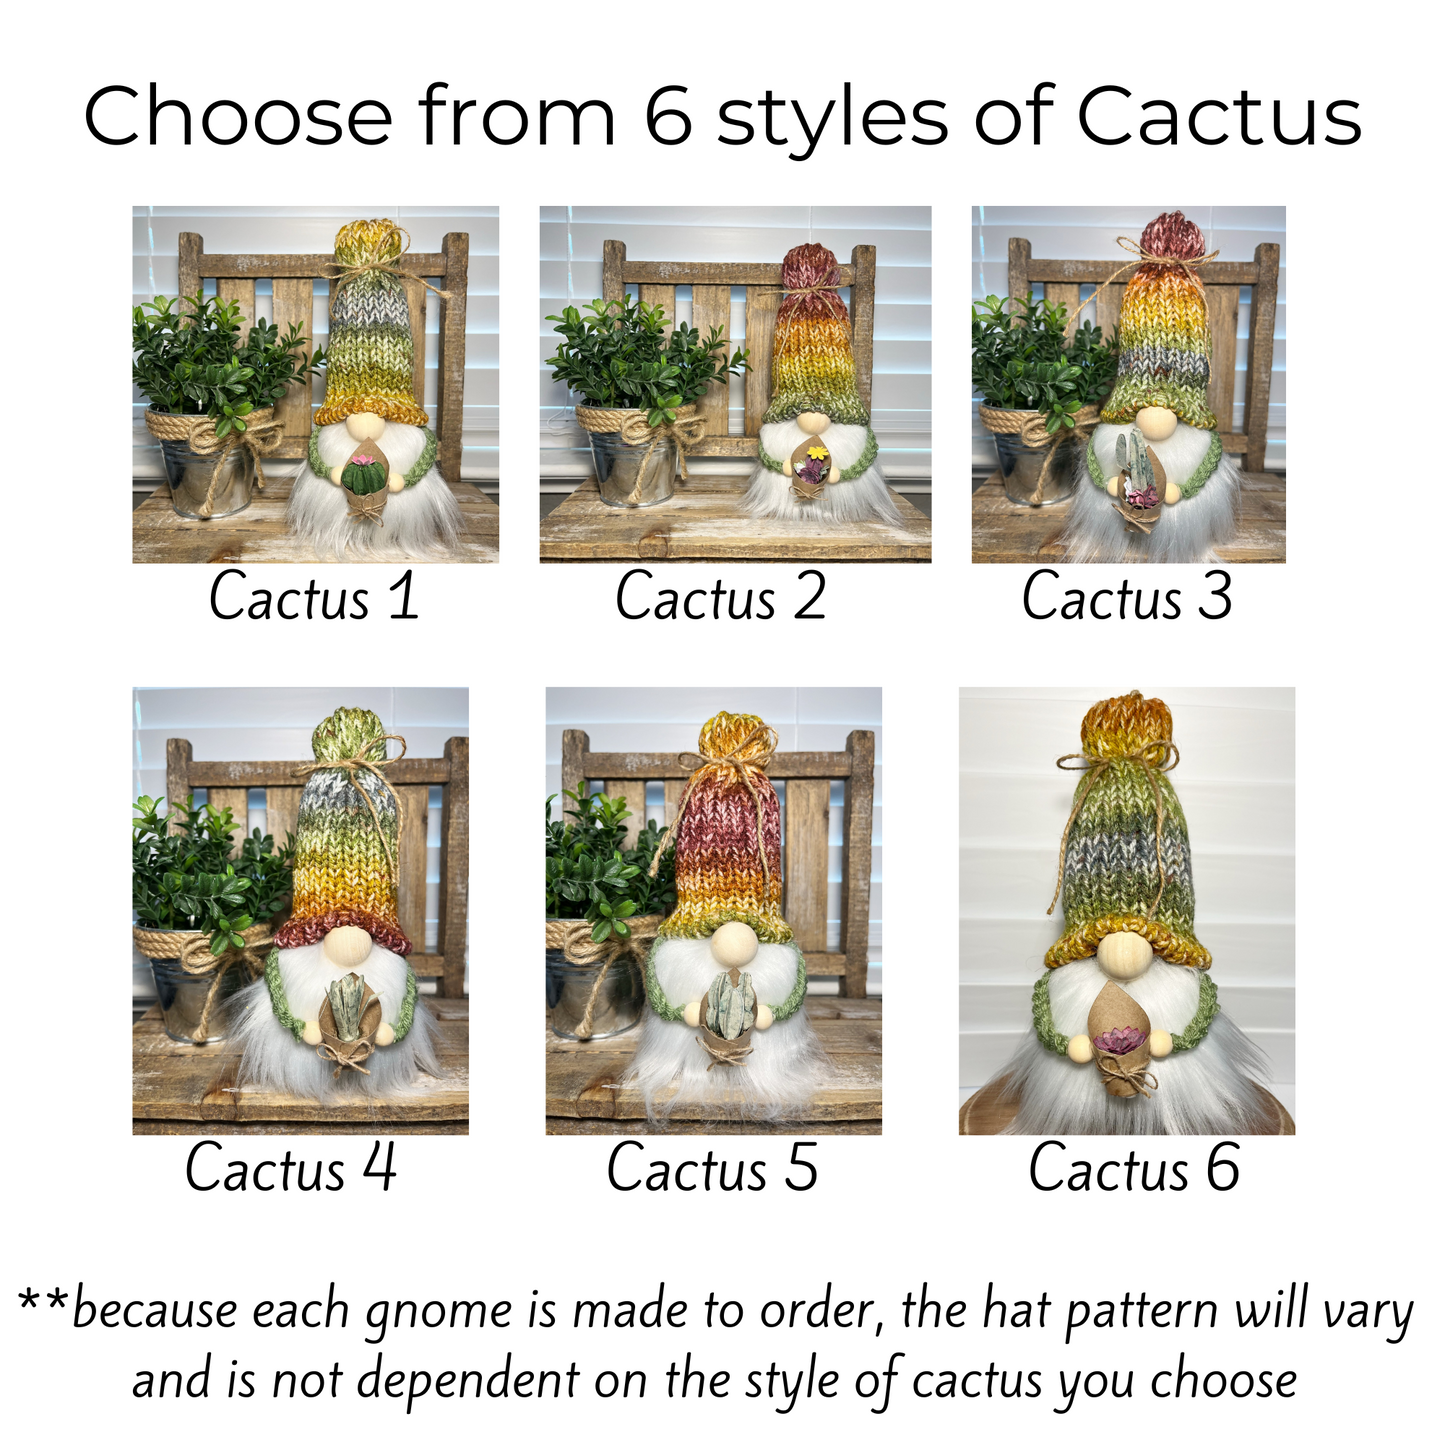 Cactus Gnome / Succulent Home Decor / Tiered Tray Display Accessories